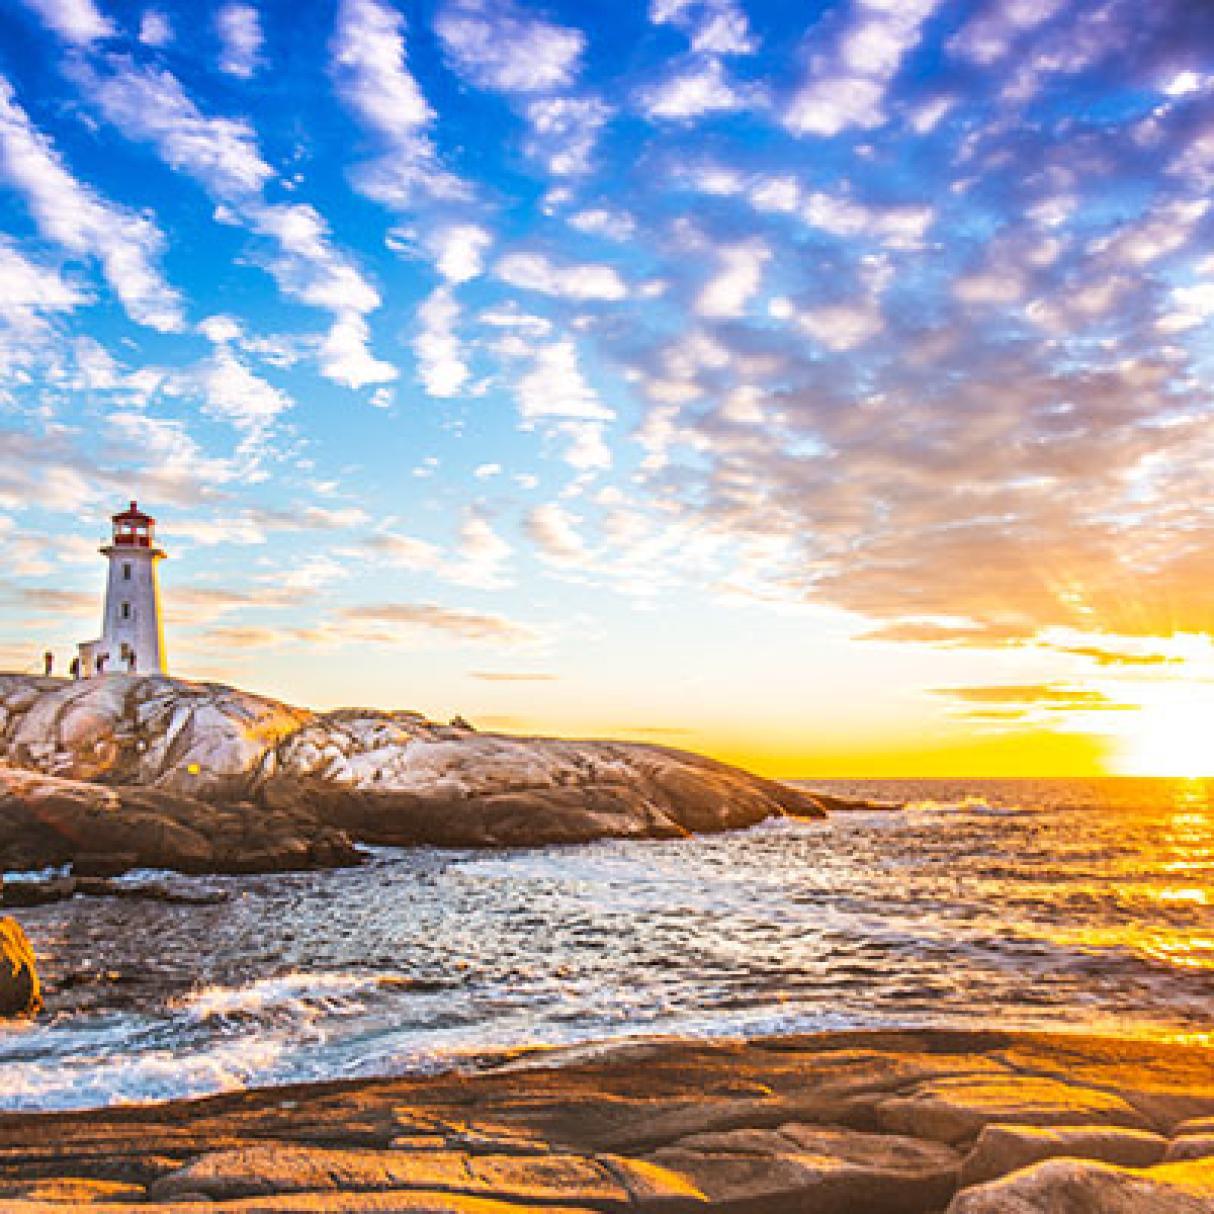 Scenic view of the lighthouse in Peggy's Cove, Nova Scotia in Atlantic Canada in the summer evening